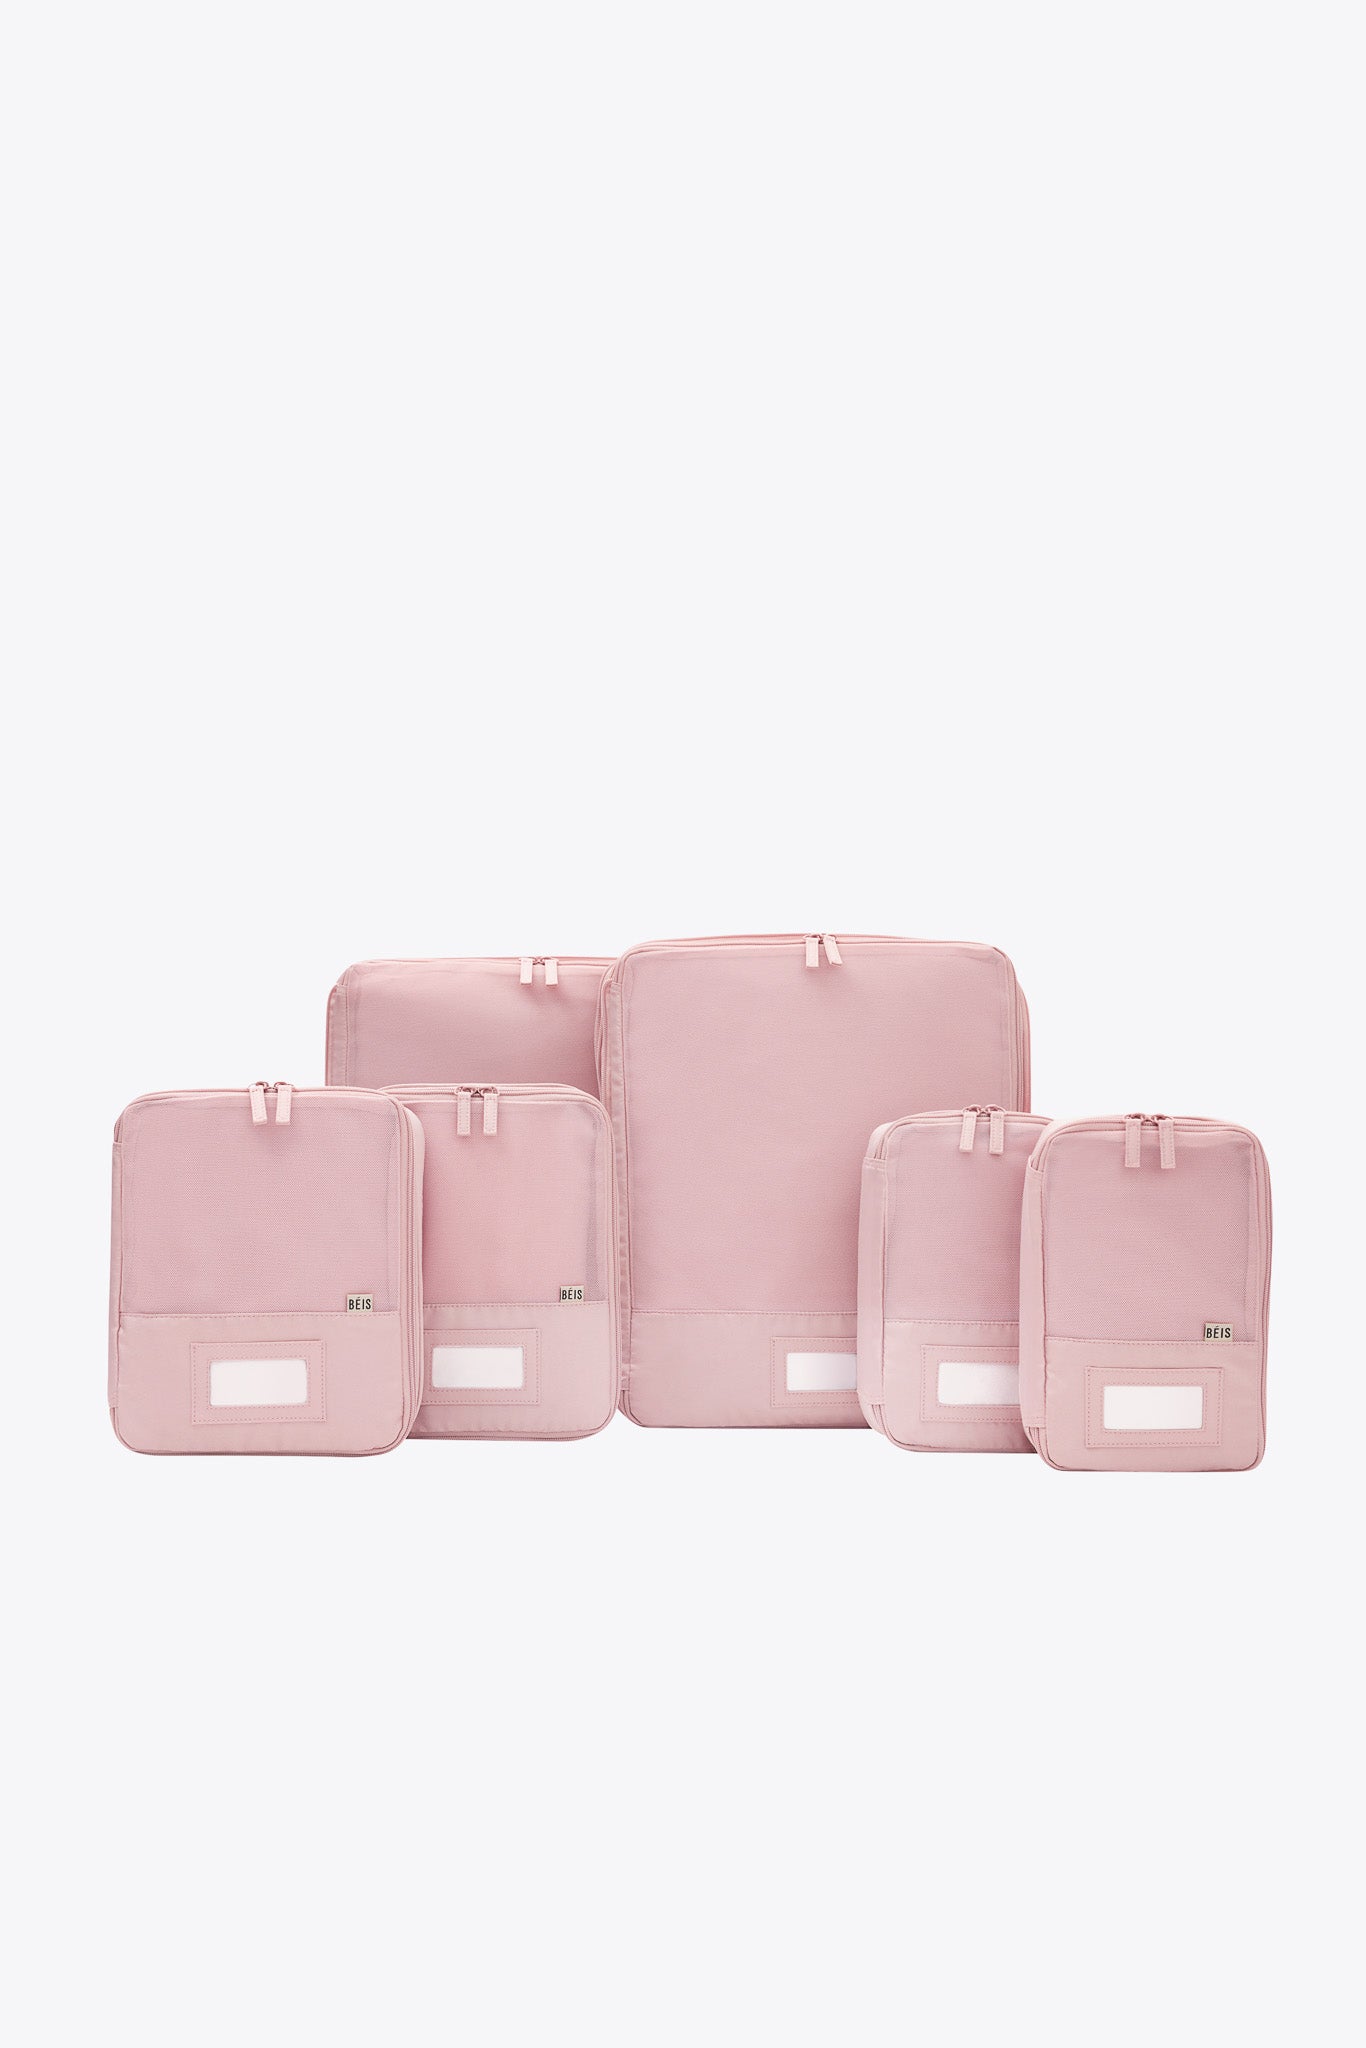 The Compression Packing Cubes 6 pc in Atlas Pink